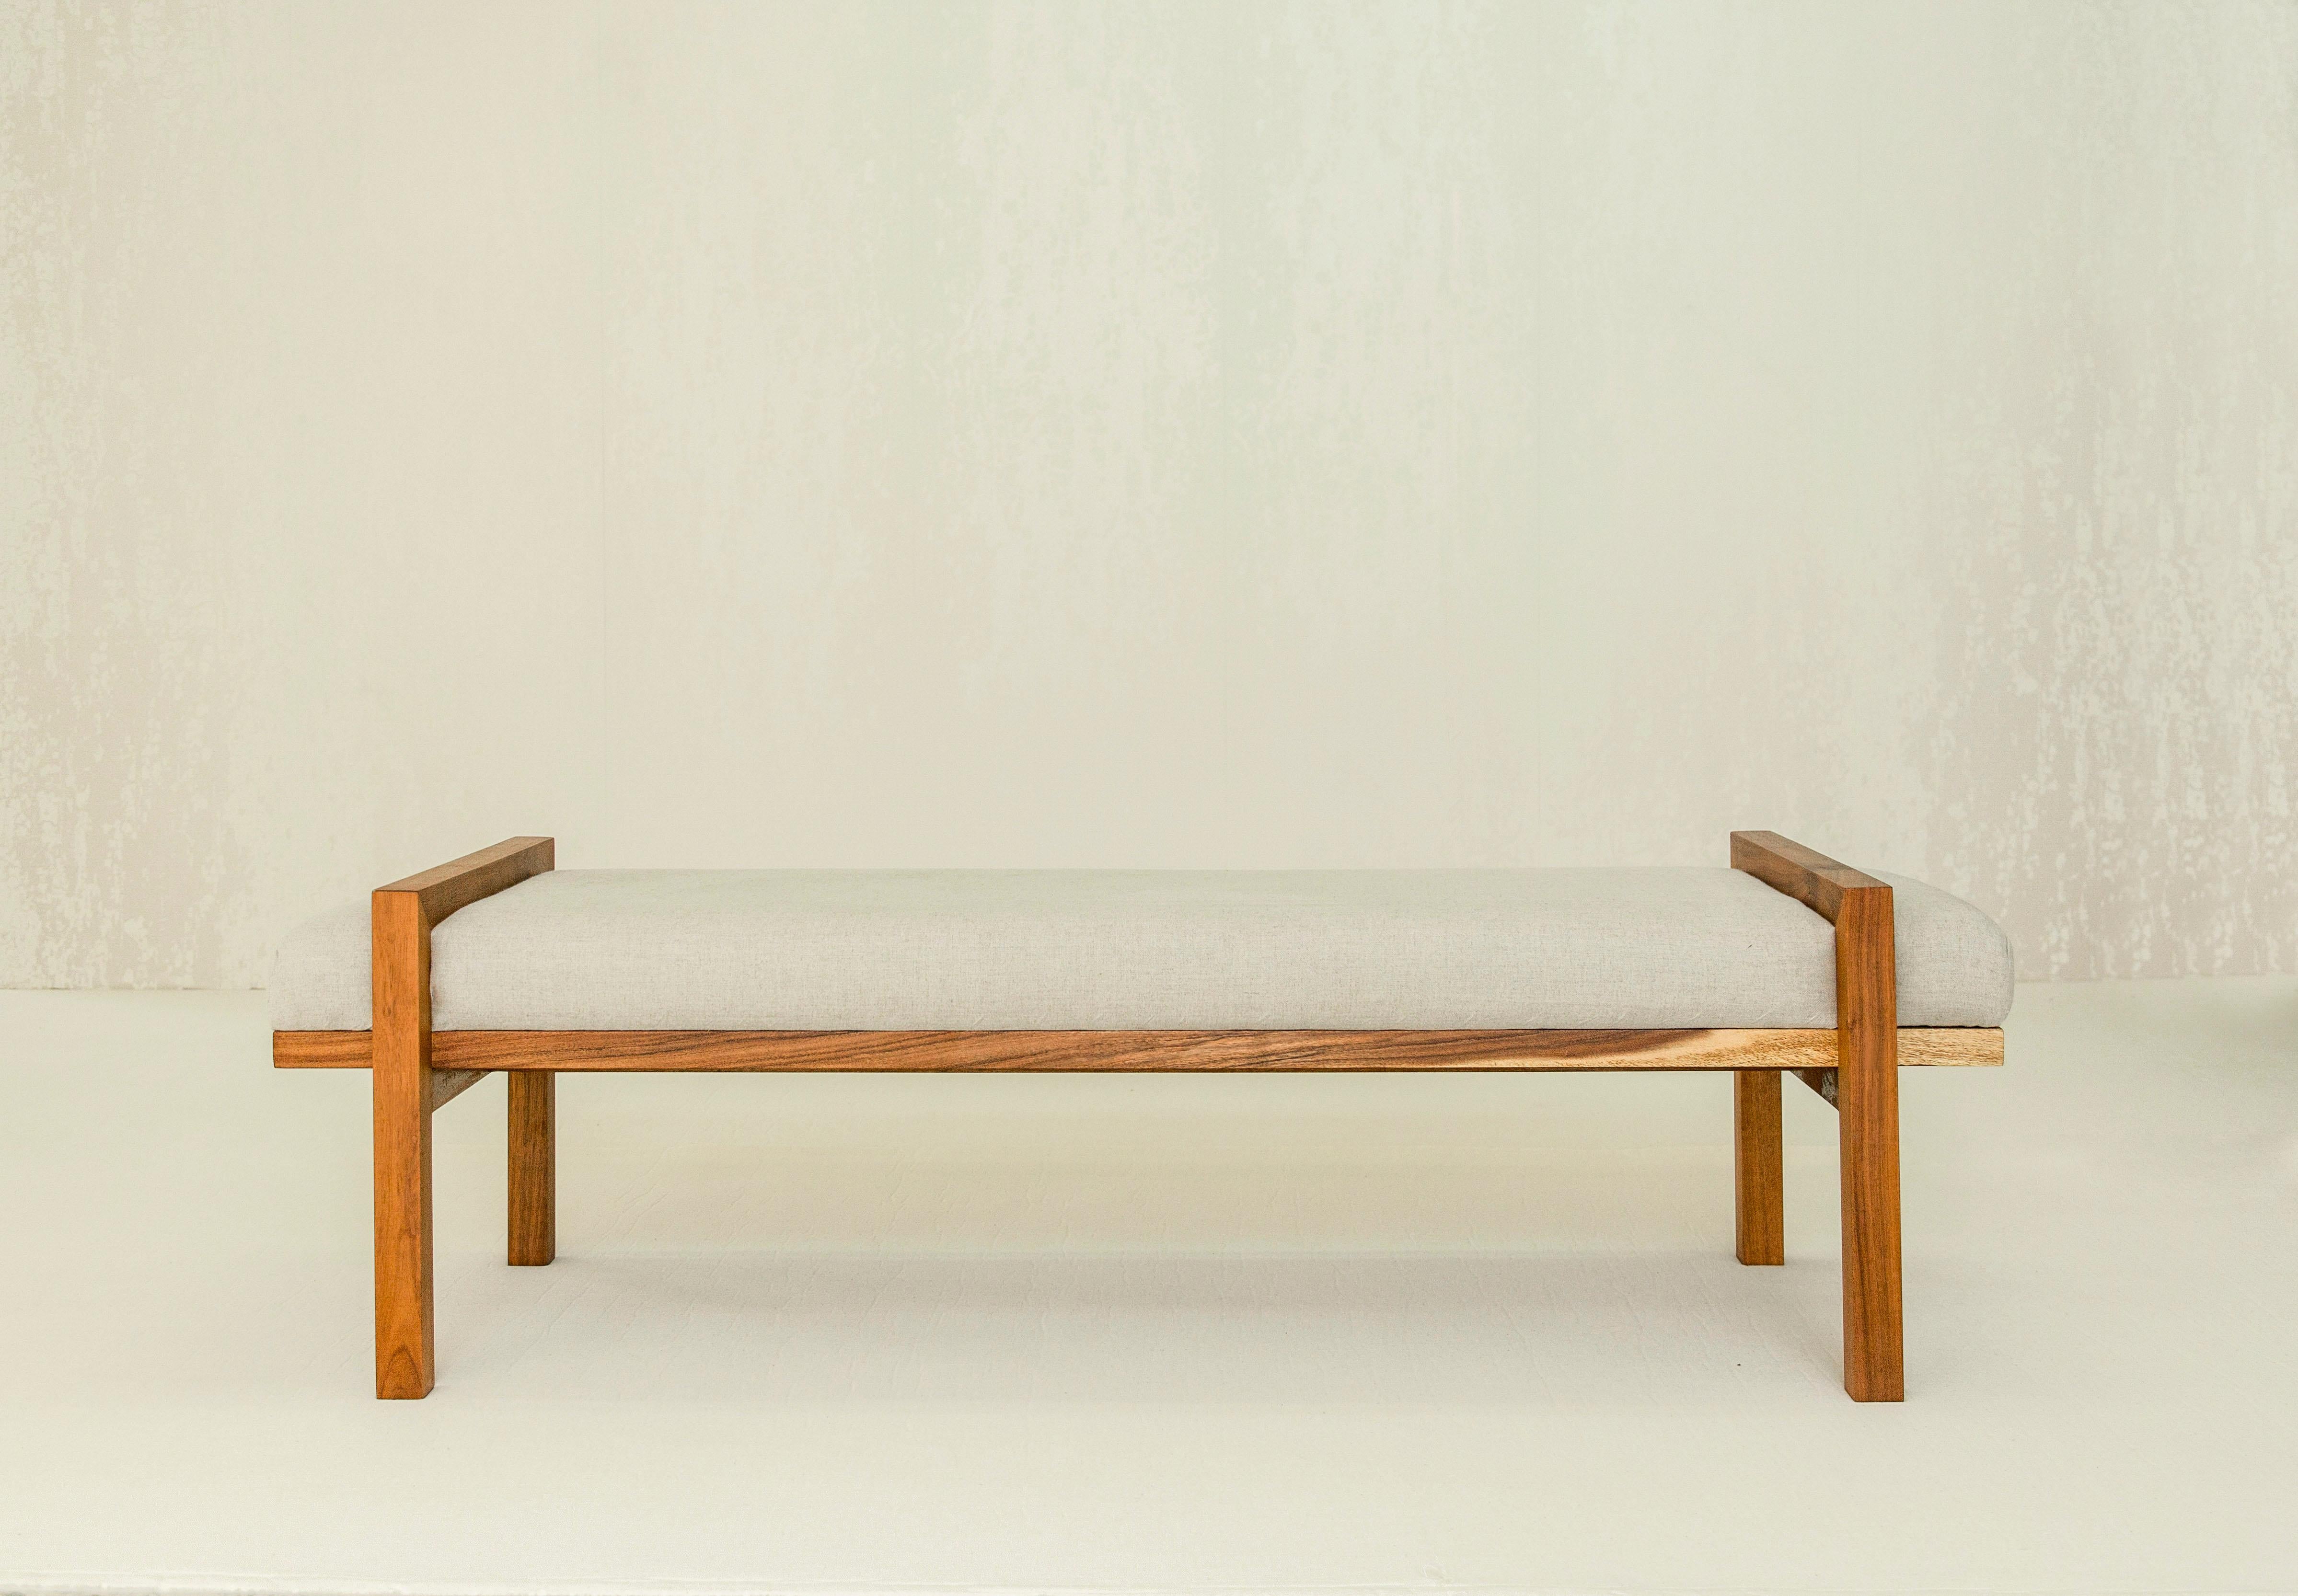 The Nara bench is made out of a Mexican wood called Tzalam. The upholstery comes in linen-many color available.

This bench can be a great compliment to a living room or the front of the bed.